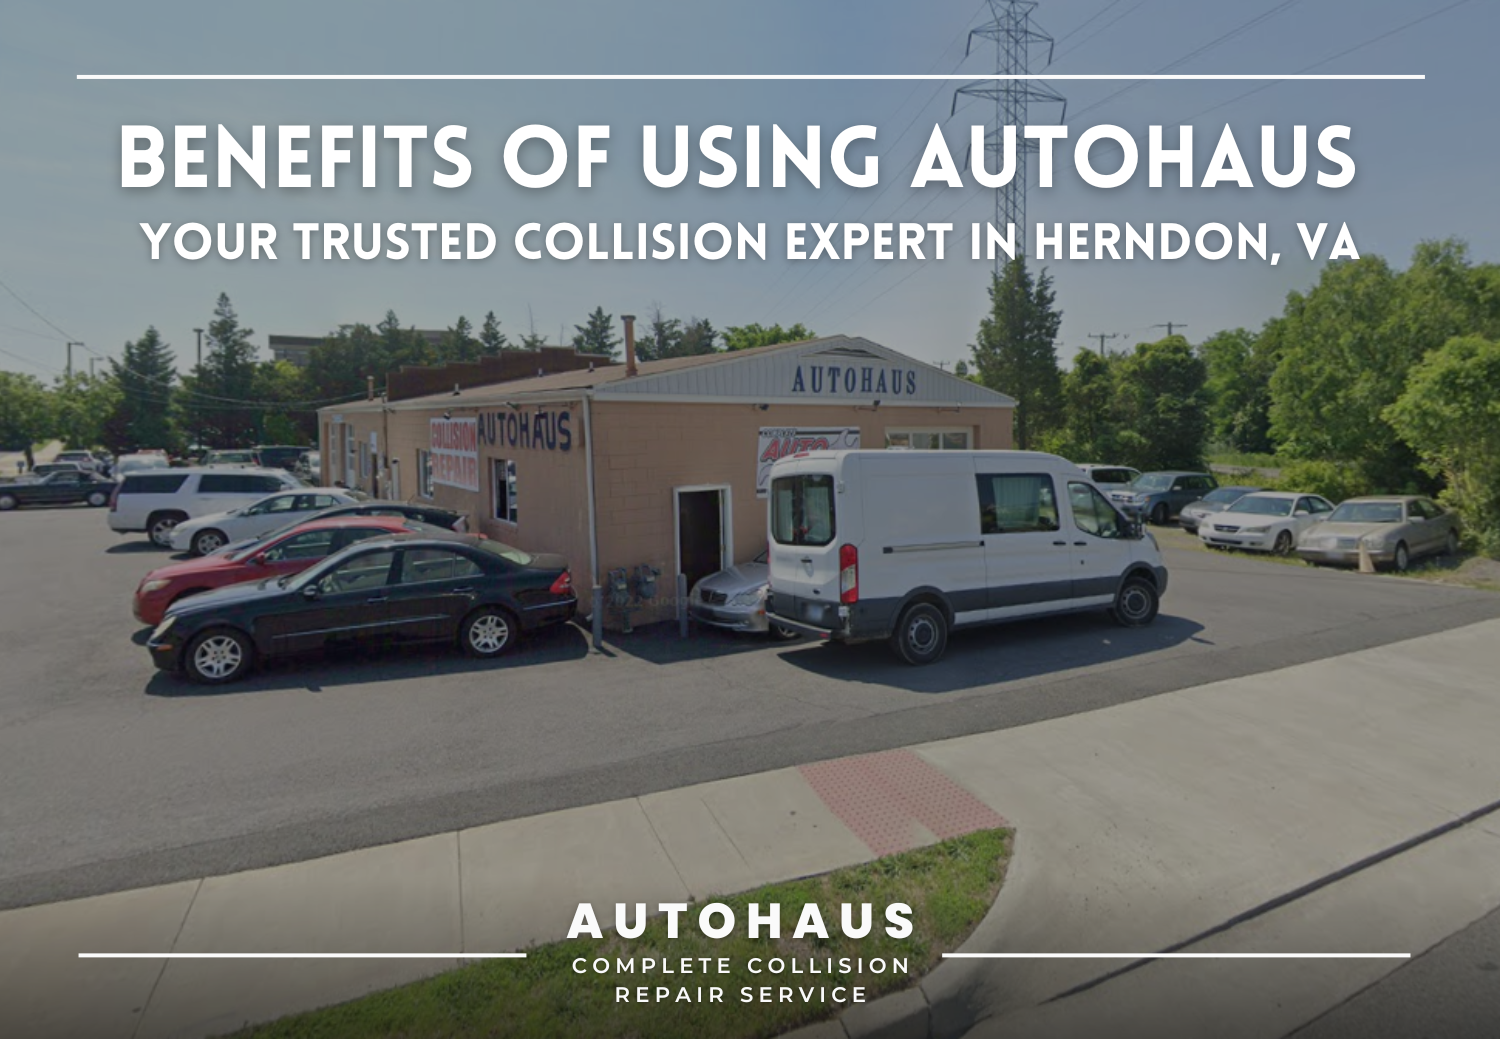 Benefits of Using AutoHaus: Your Trusted Collision Expert in Herndon, VA